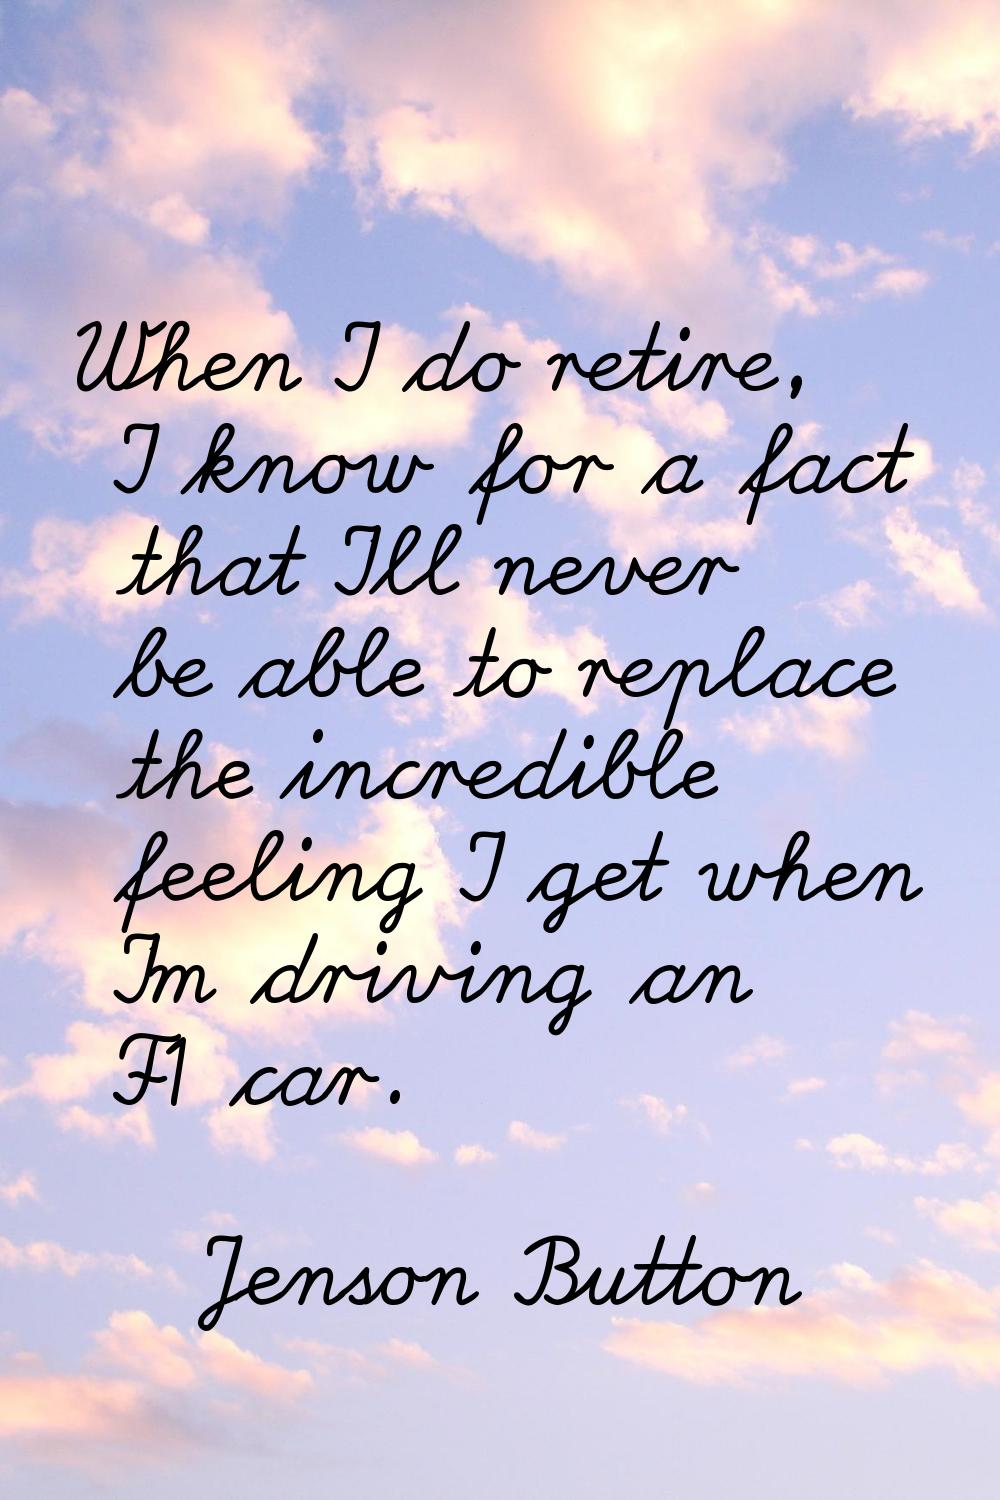 When I do retire, I know for a fact that I'll never be able to replace the incredible feeling I get